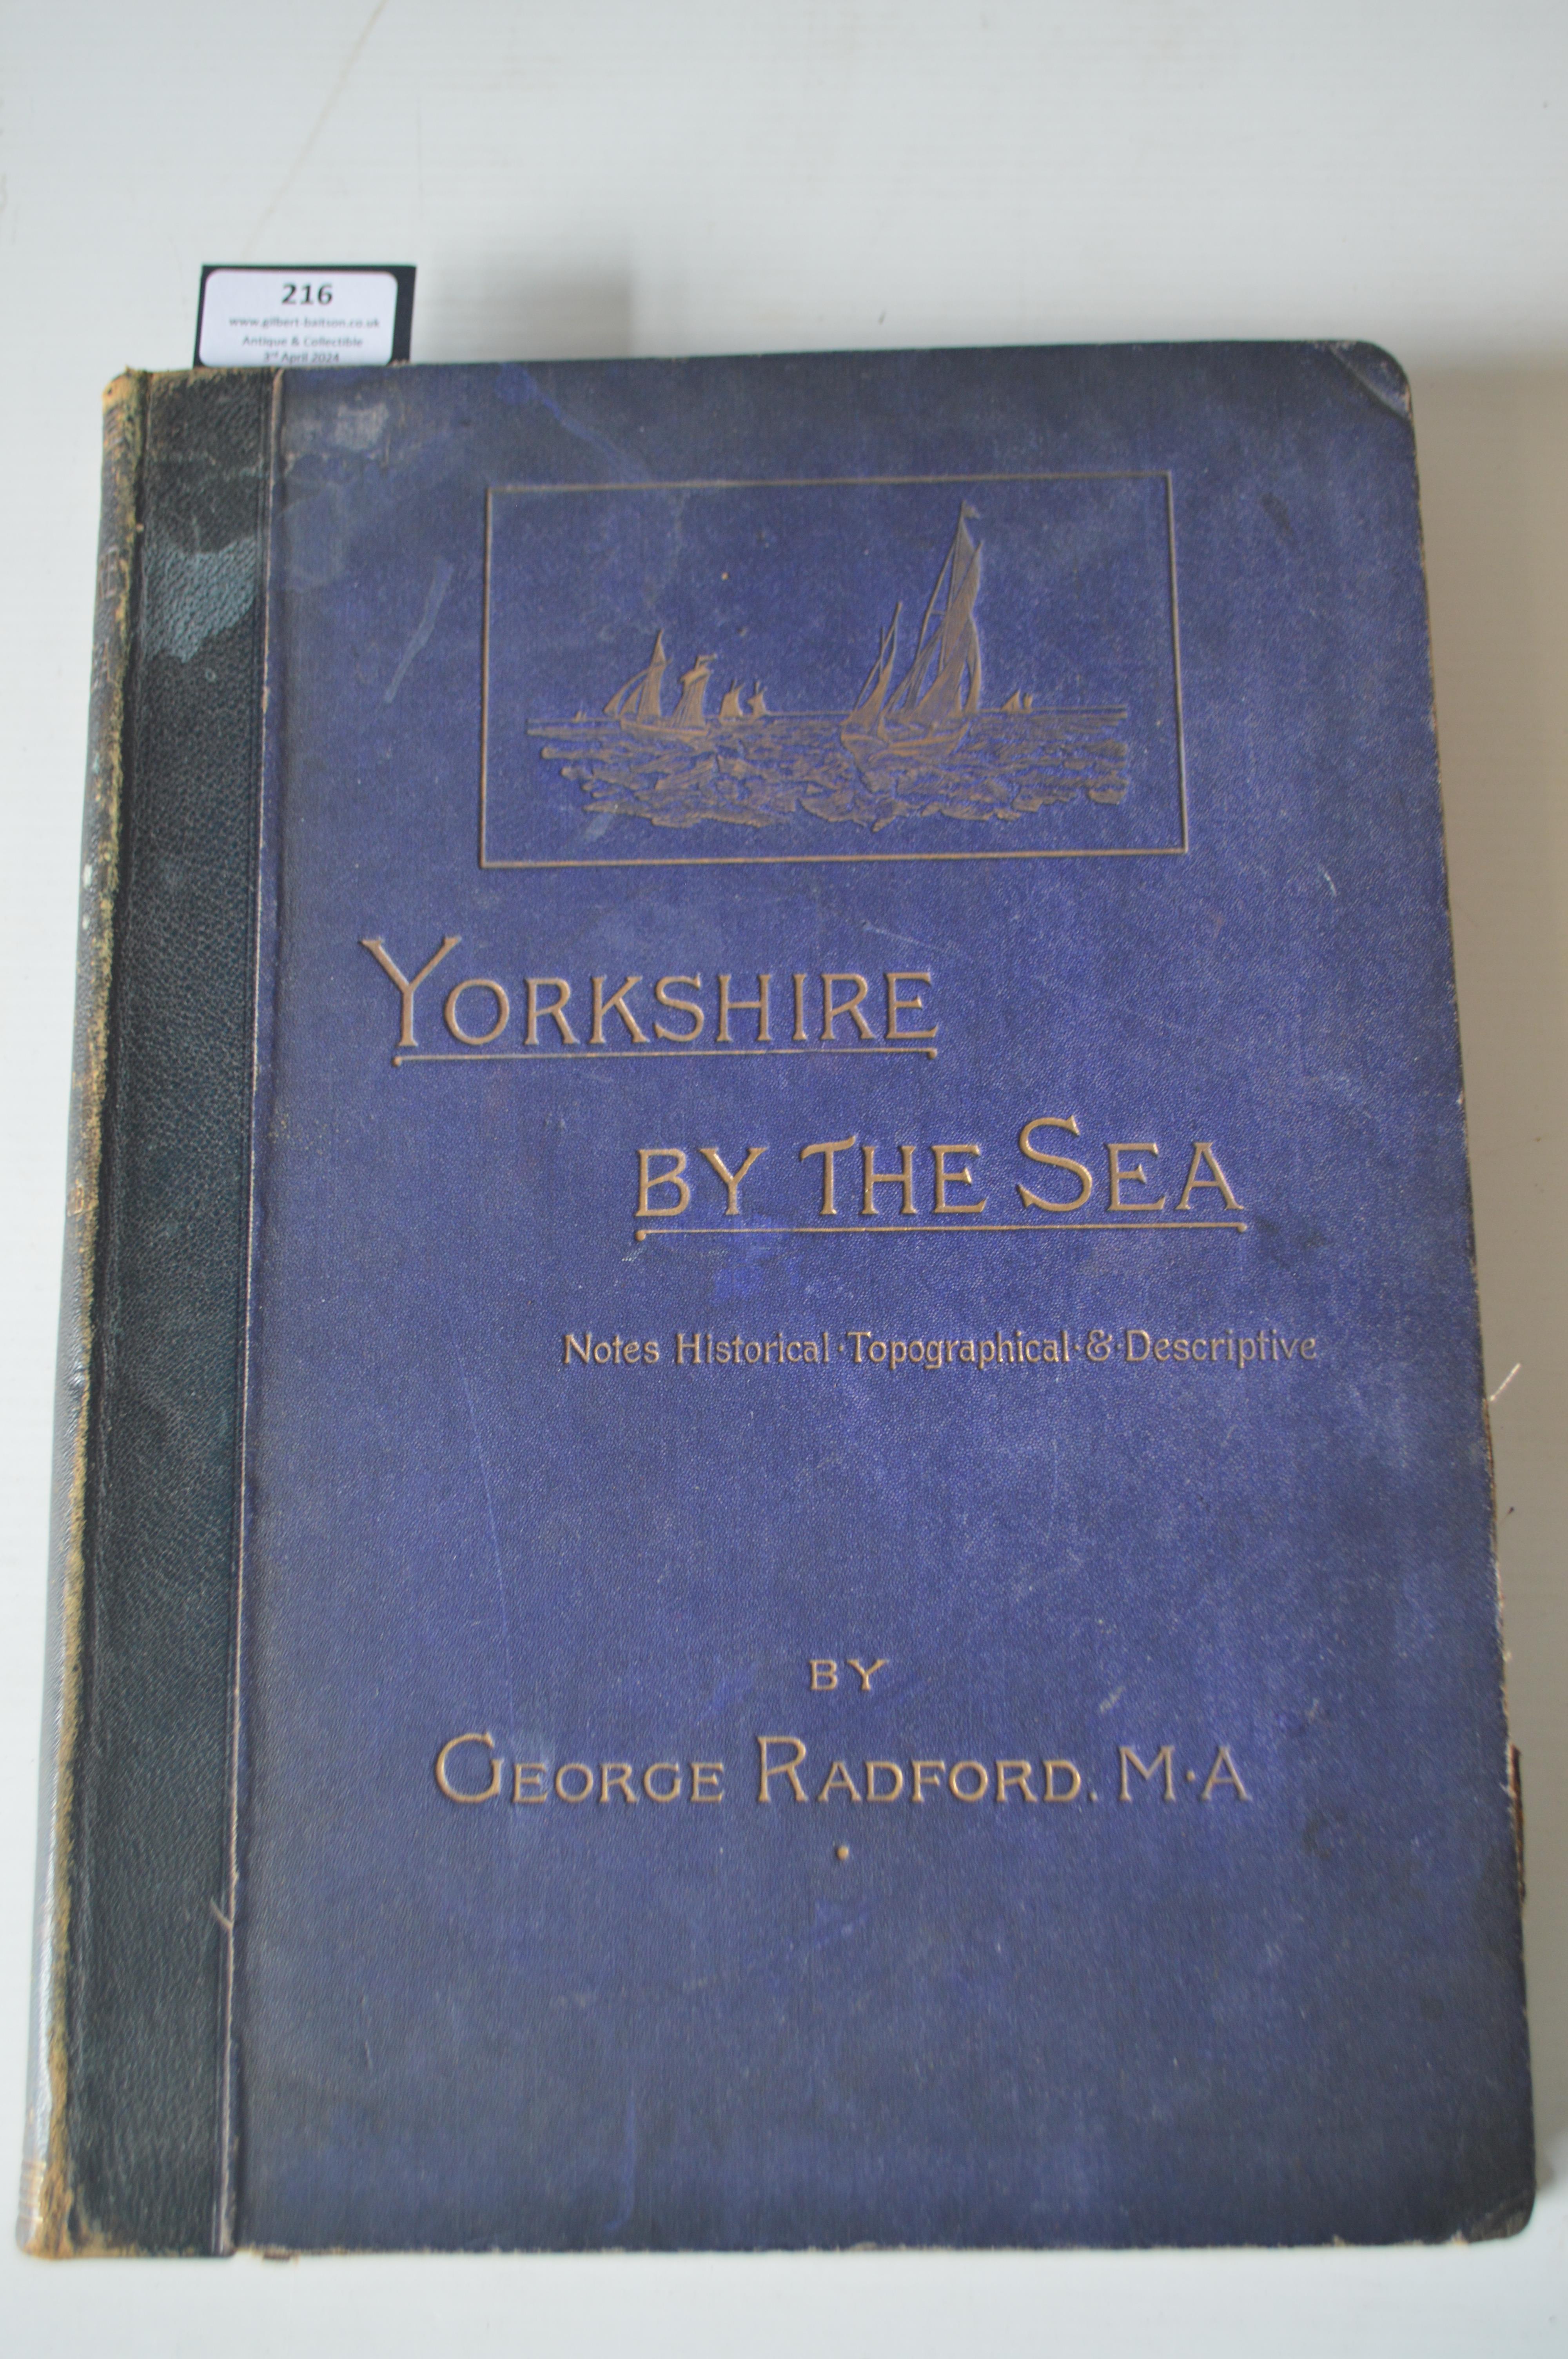 Yorkshire by the Sea by George Radford 1891